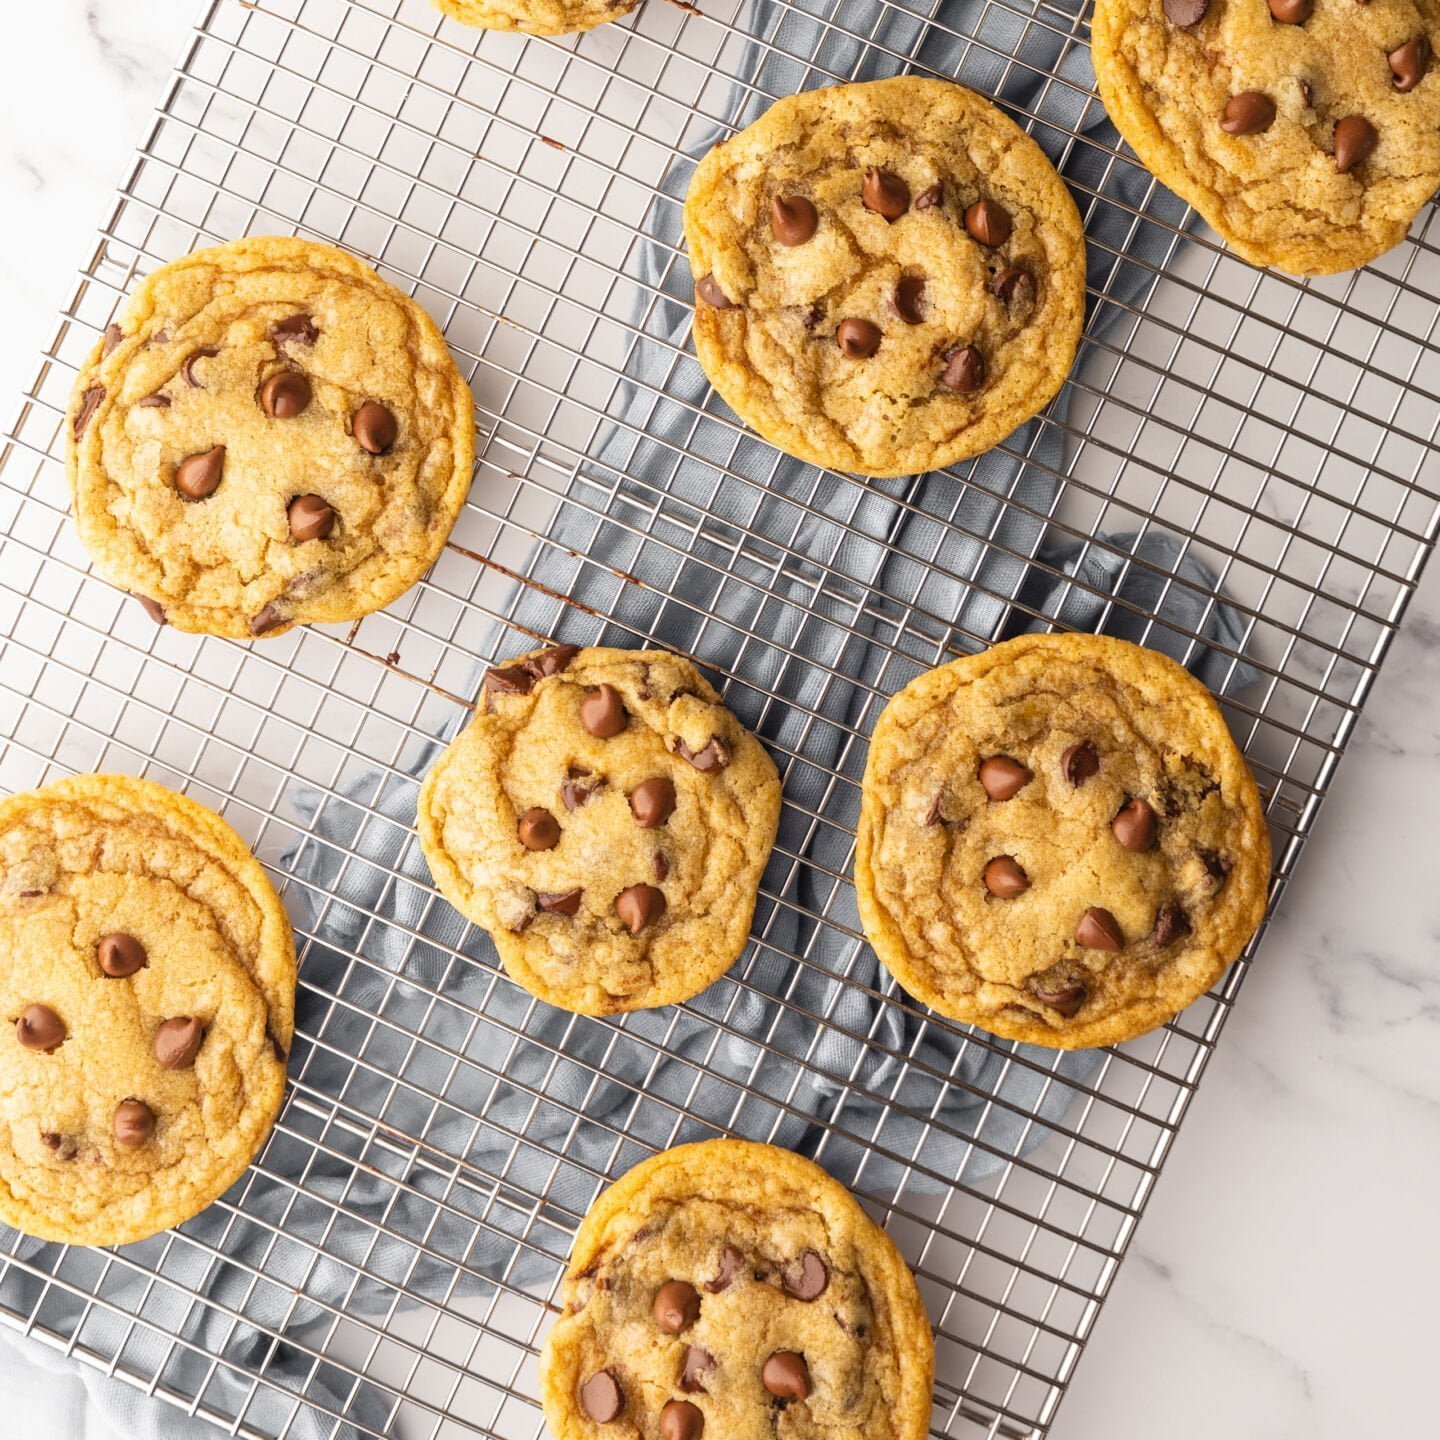 Chocolate chip cookies - featured